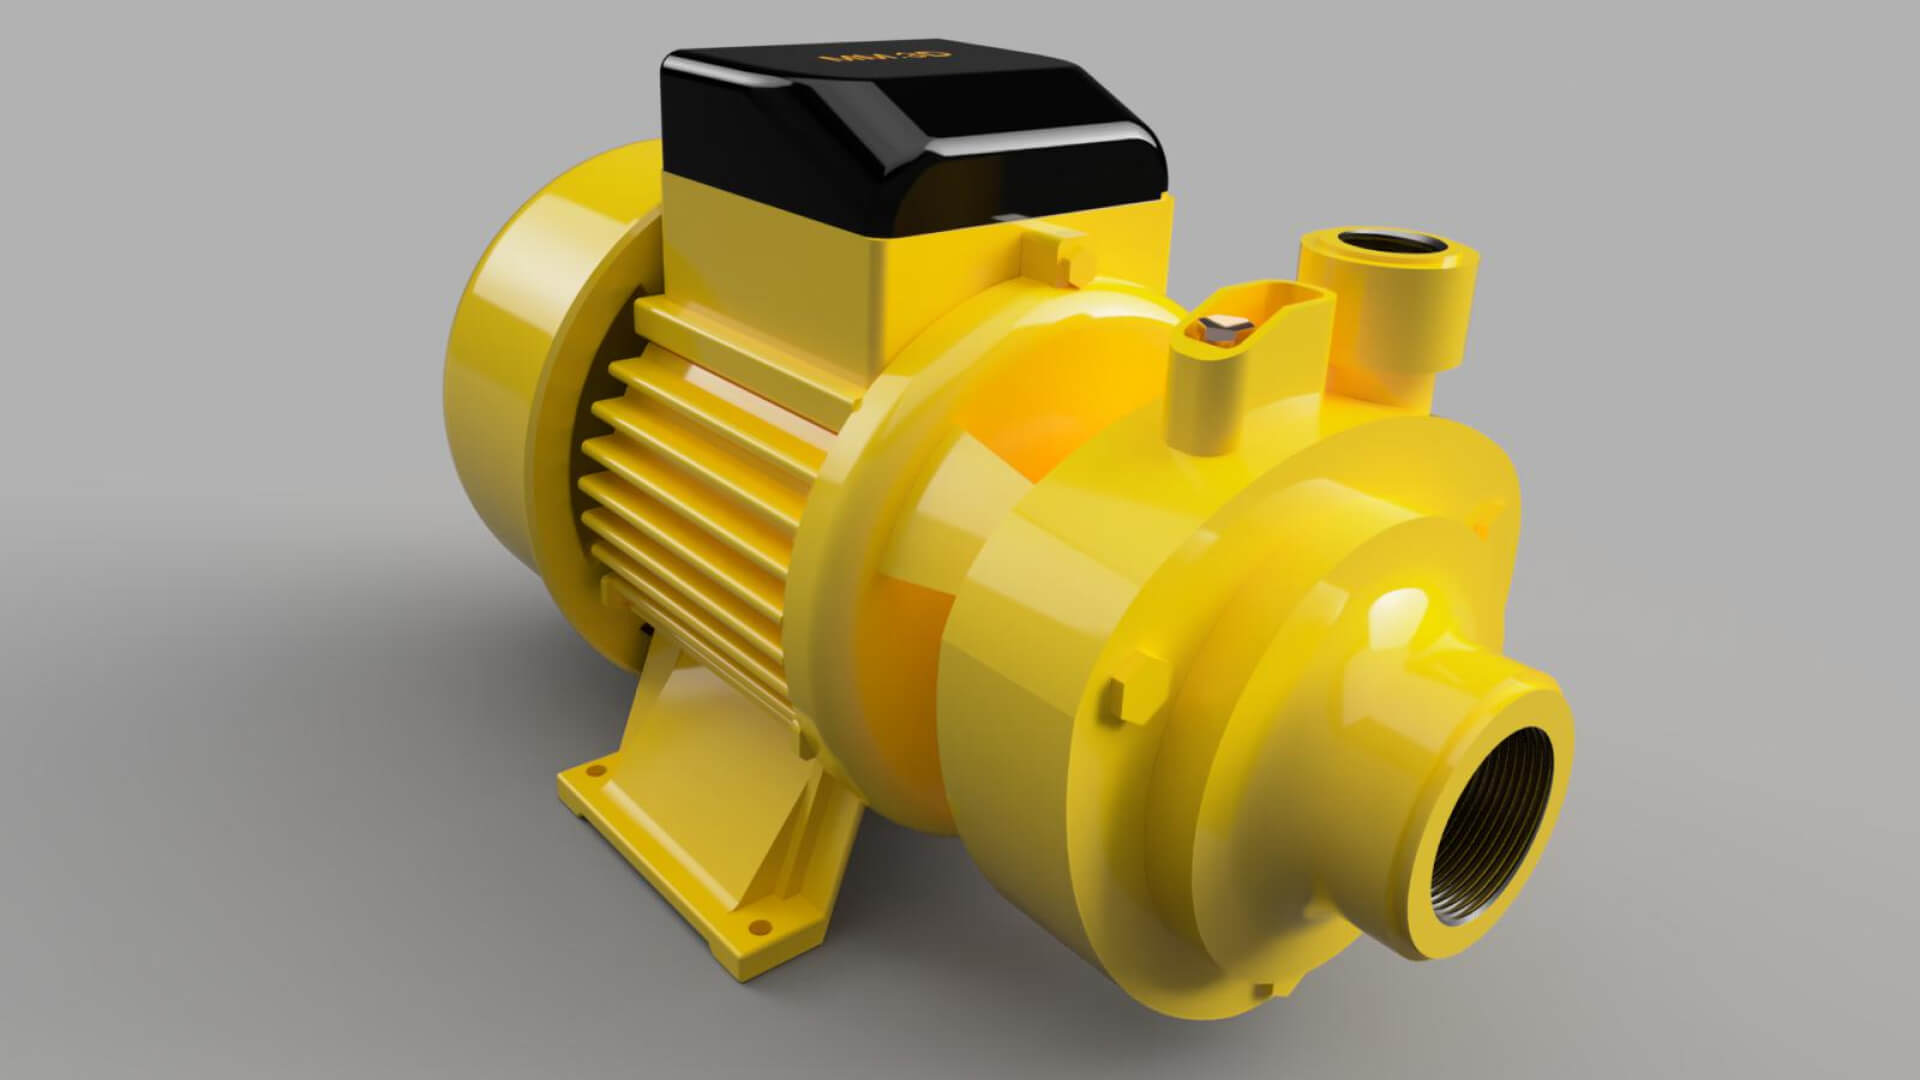 A 3D CAD drawing of a water pump.